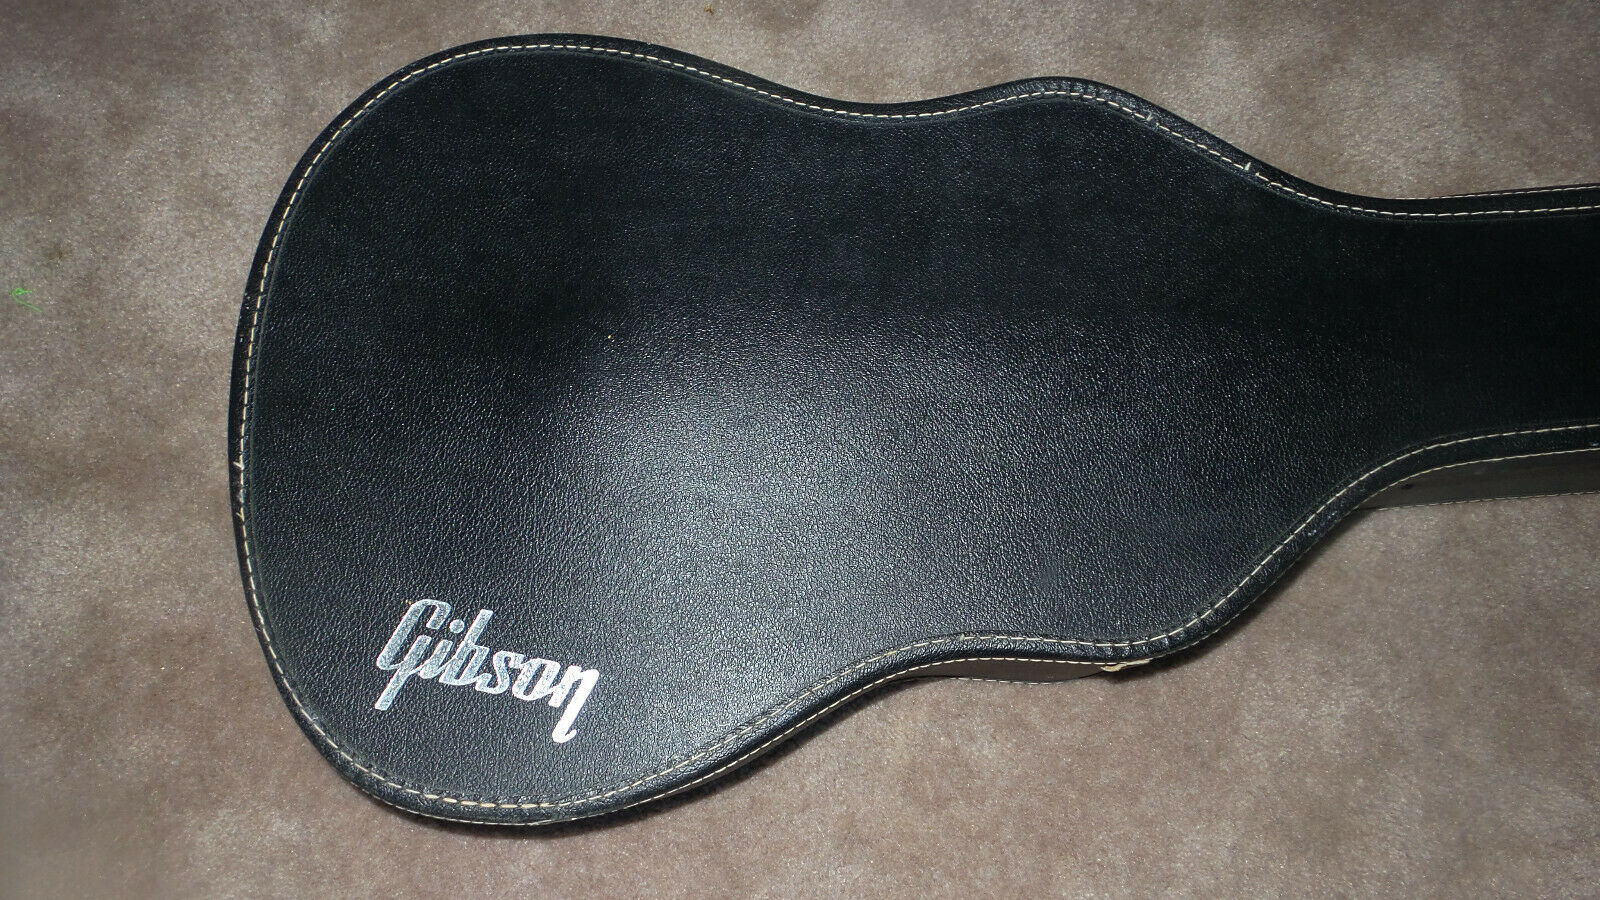 Vintage Gibson Guitar Case in Excellent condition,